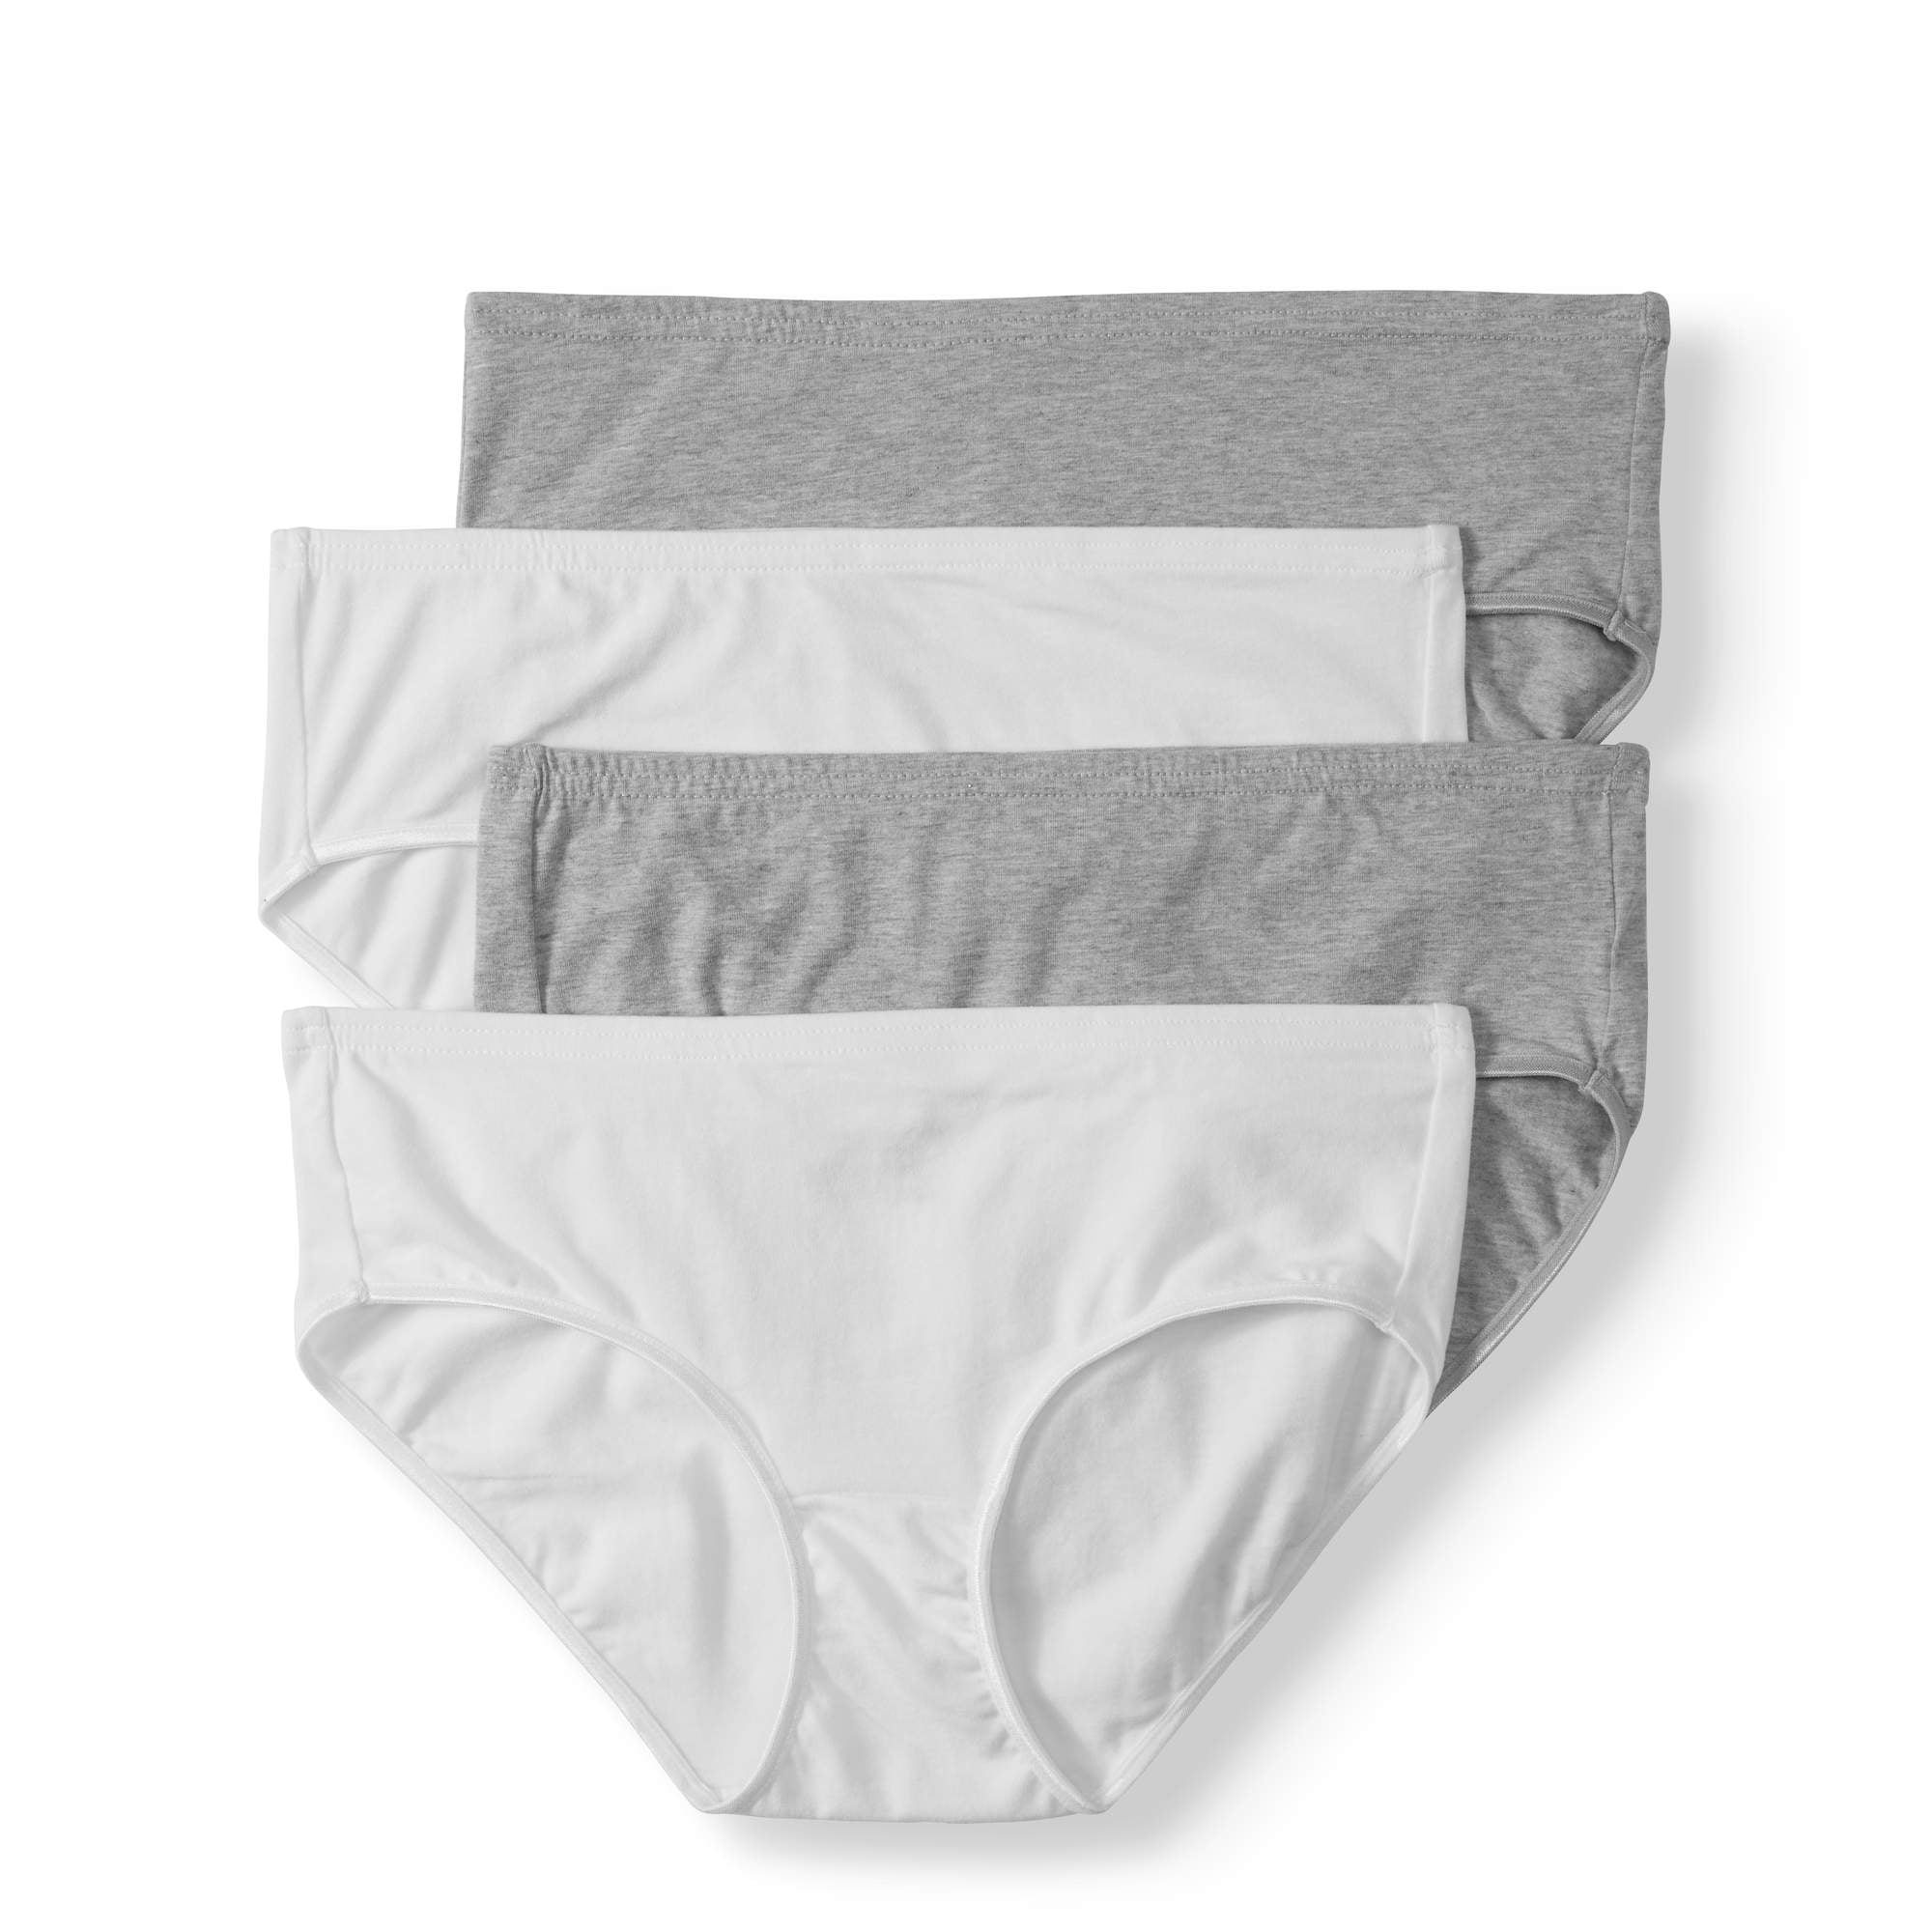 Buy DIVING DEEP Girls/Women's 100% Cotton Hipsters Panty Set I Panty Combo  I Thong Panty I Pack of 3 (S, Beige White & Black) at